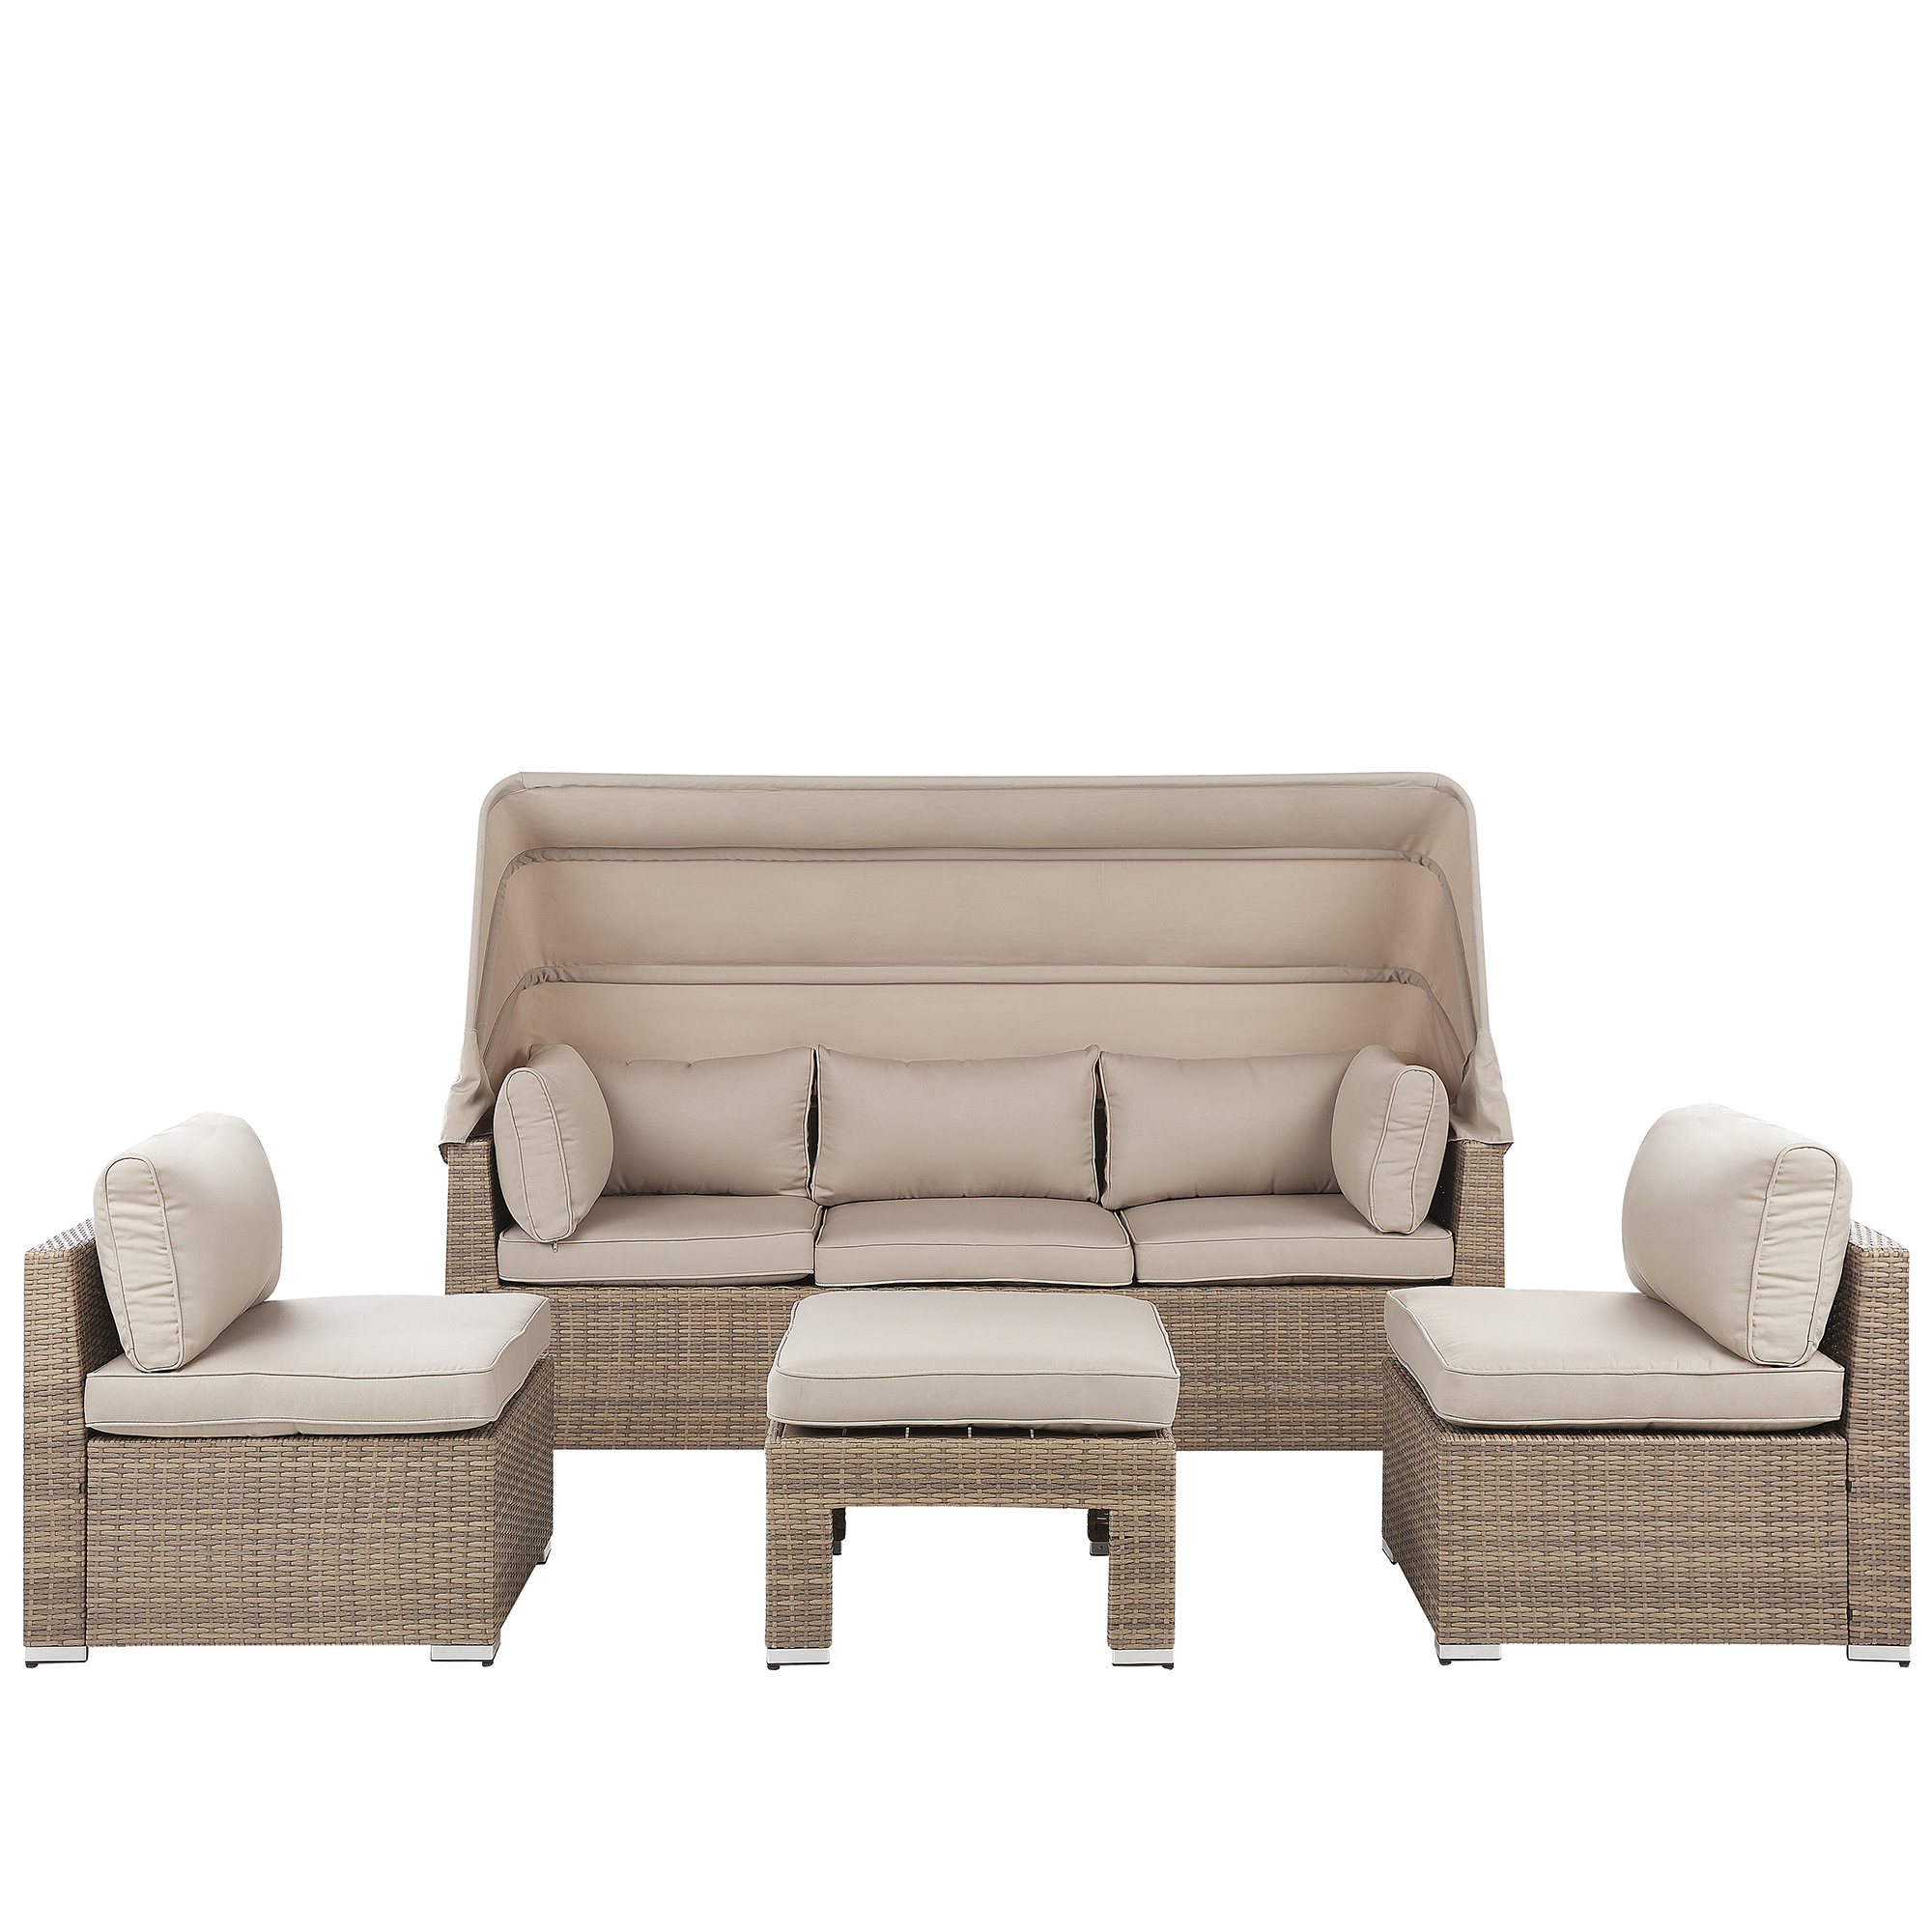 Beliani Outdoor Garden Set Beige Light Brown PE Rattan Sofa with Canopy and Cushions Chairs Ottoman Modern Design Material:PE Rattan Size:xx